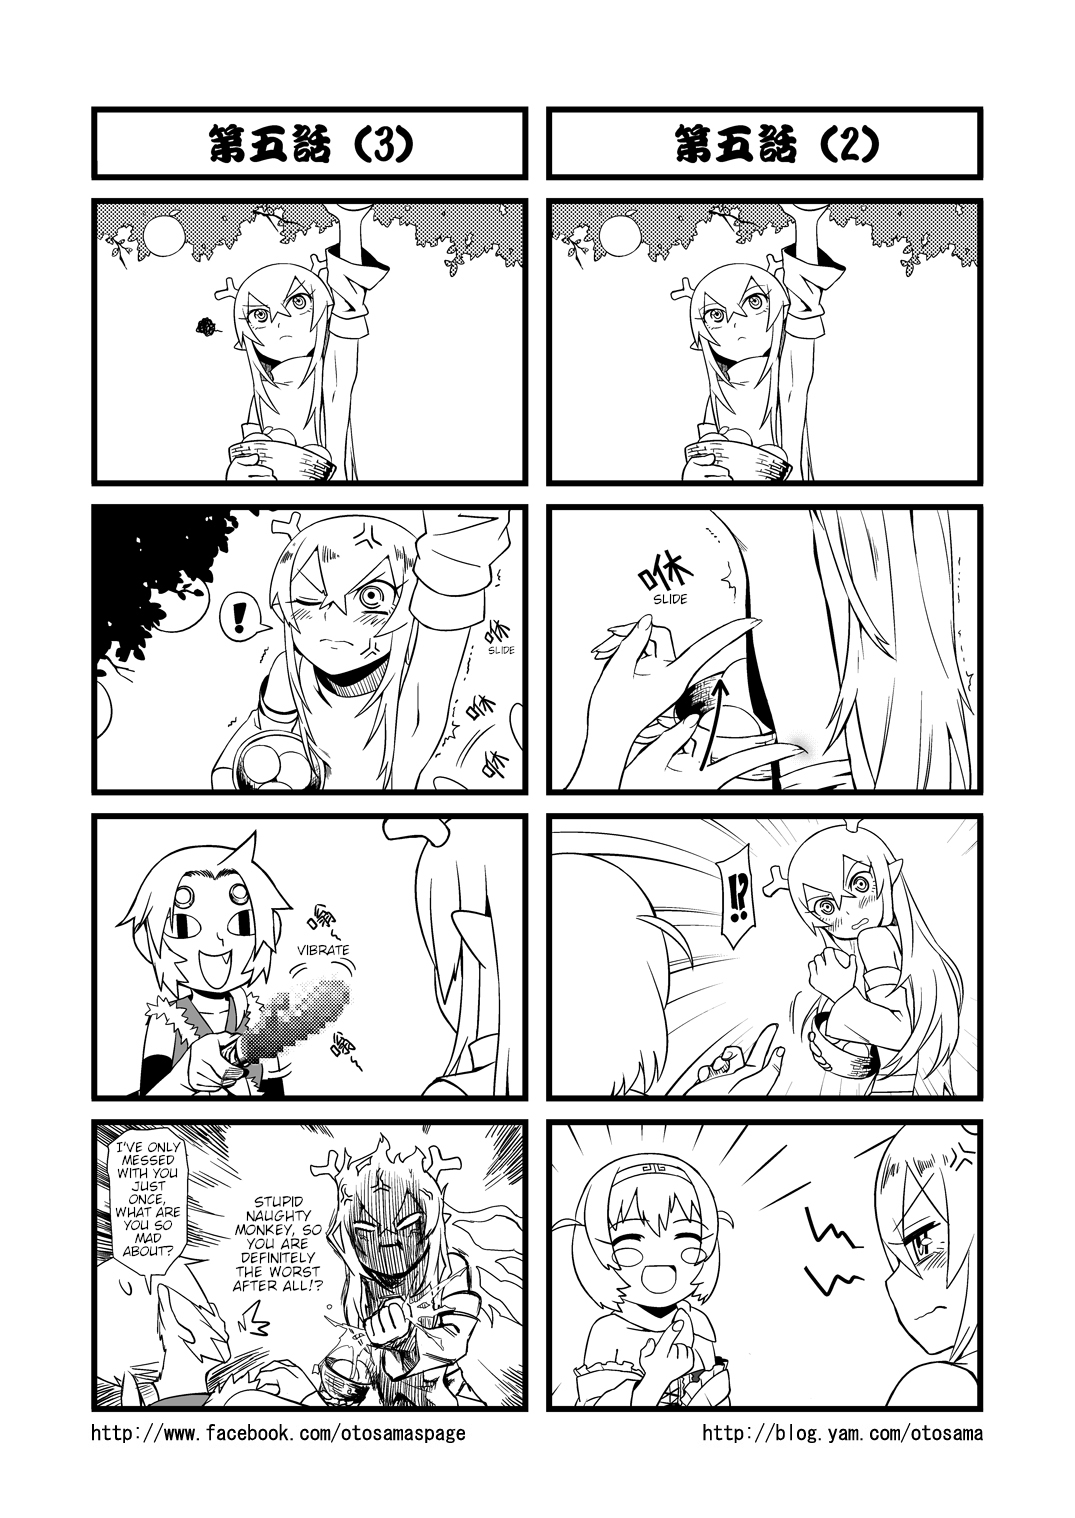 Tang Hill Burial - Journey To The West Irresponsible Anything Goes Edition - Page 2